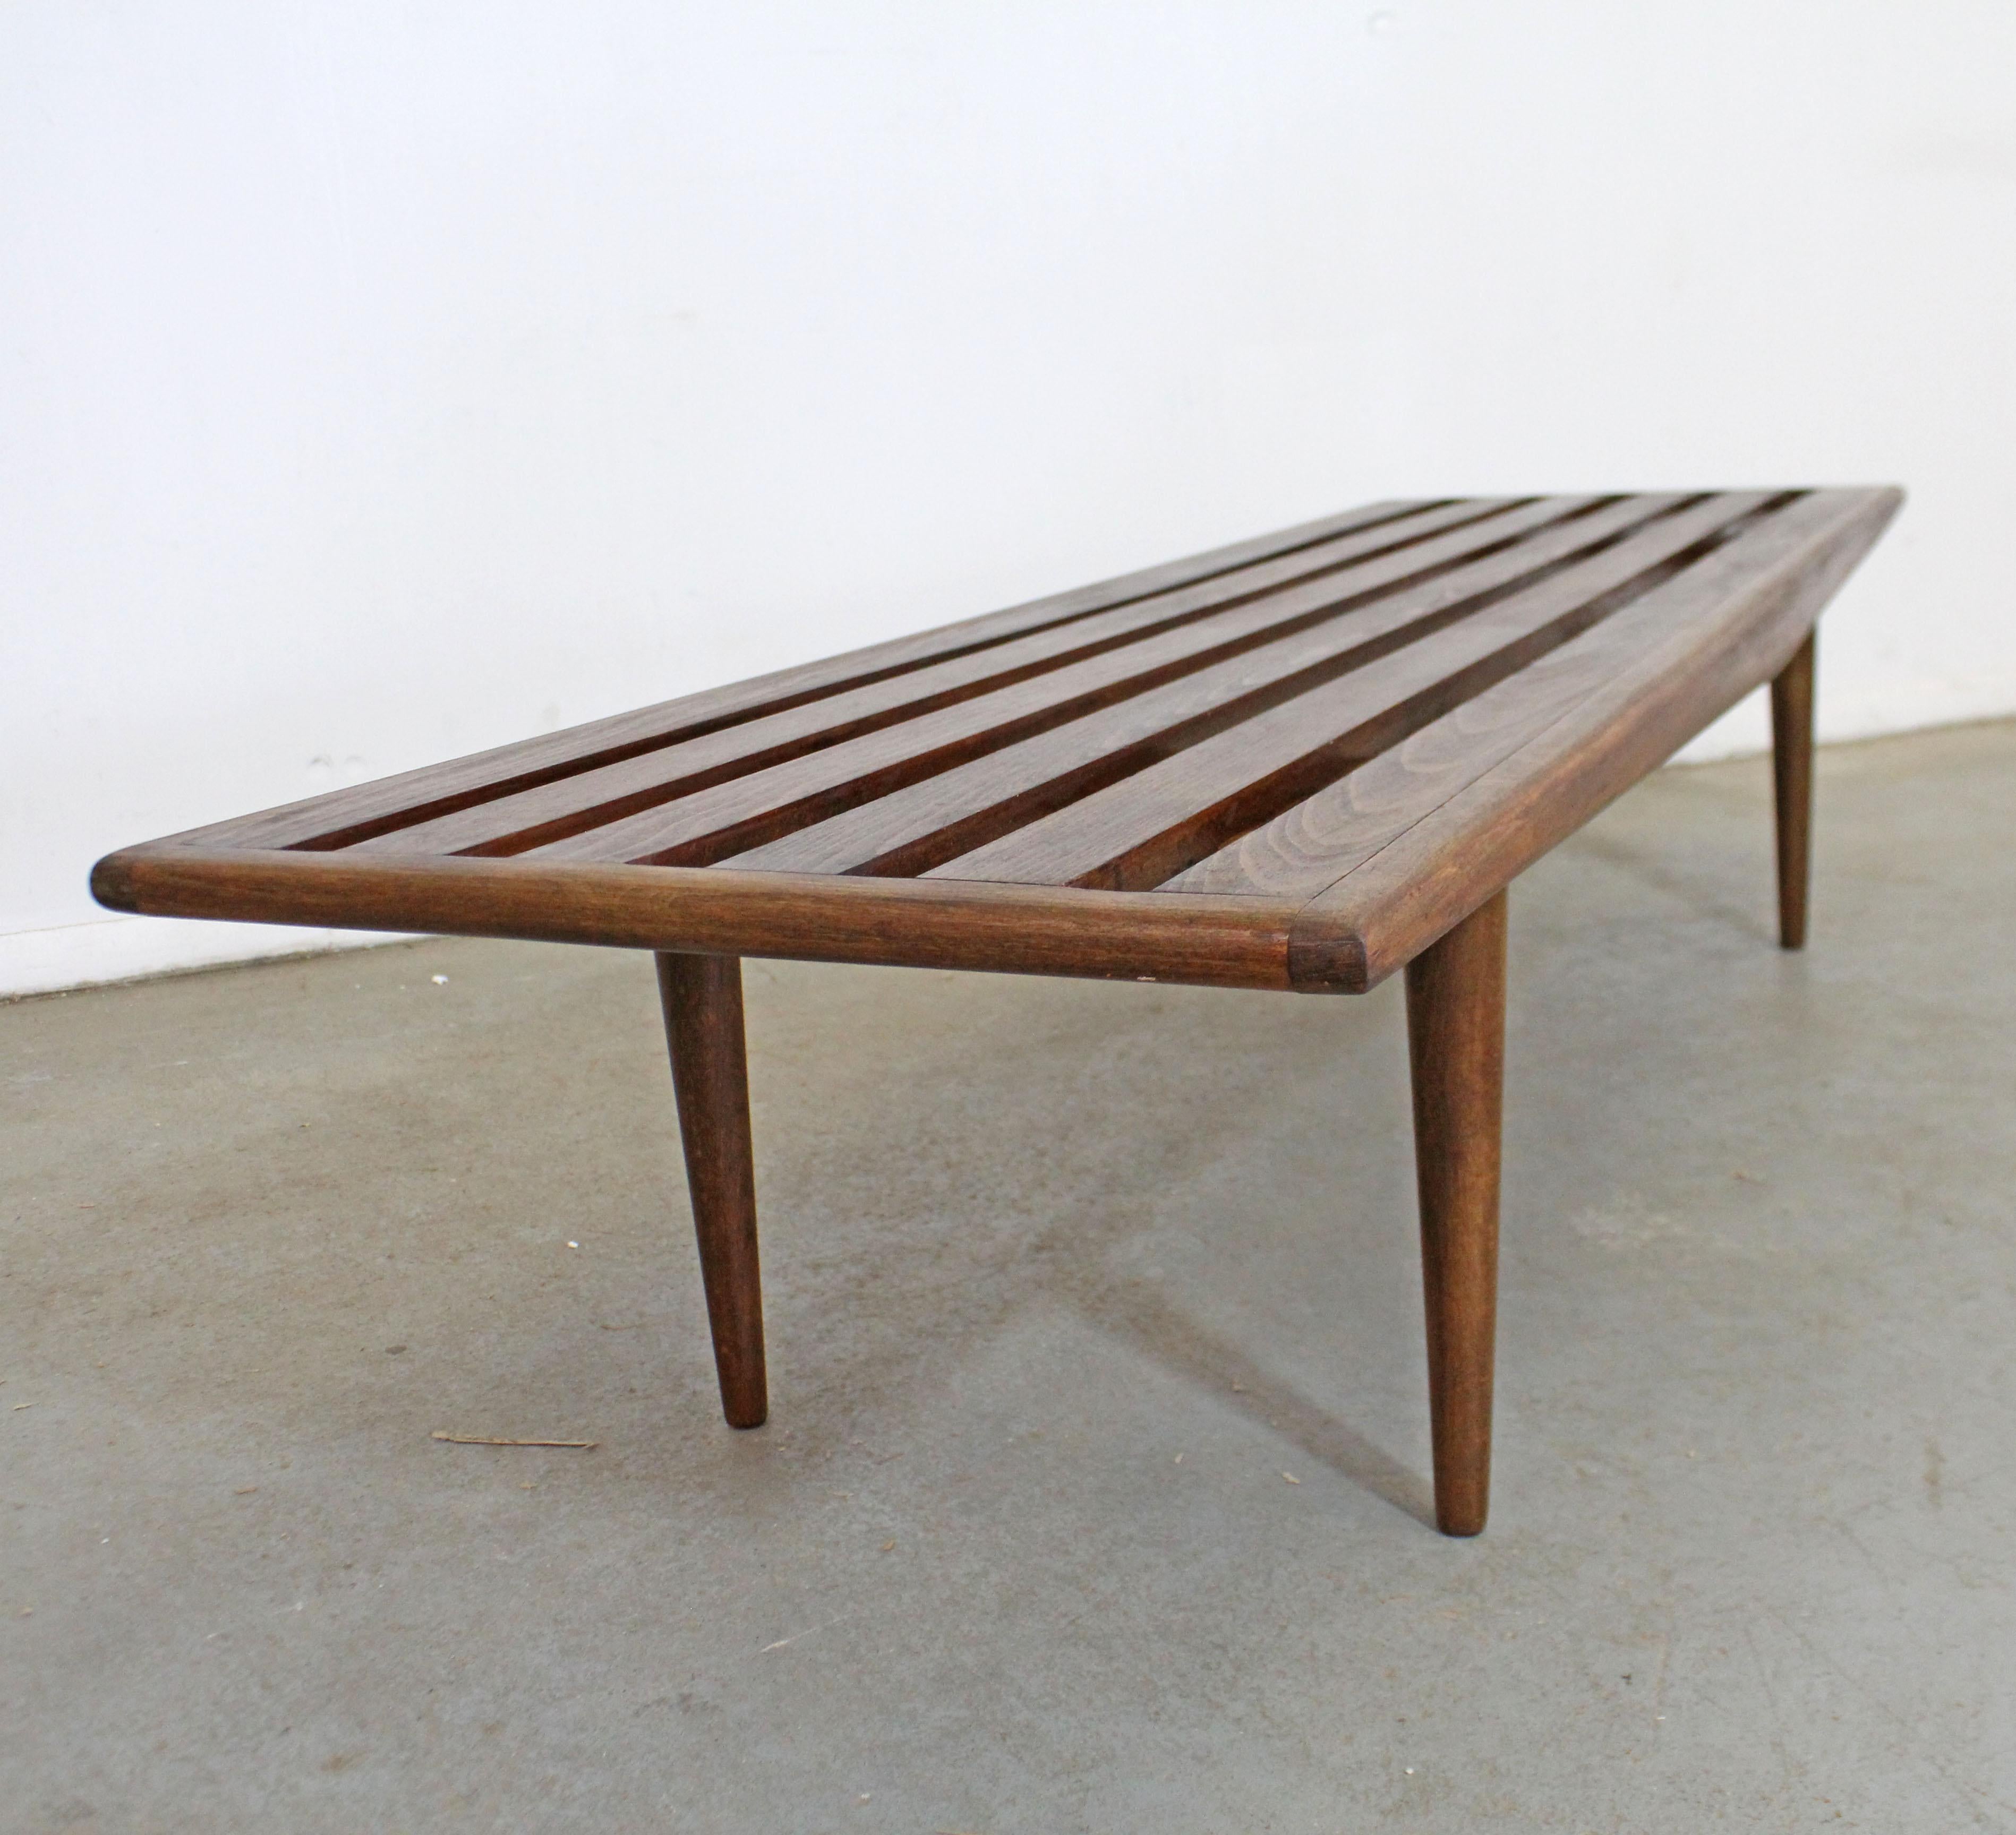 20th Century Mid-Century Modern Sculpted Low Slat Bench Coffee Table